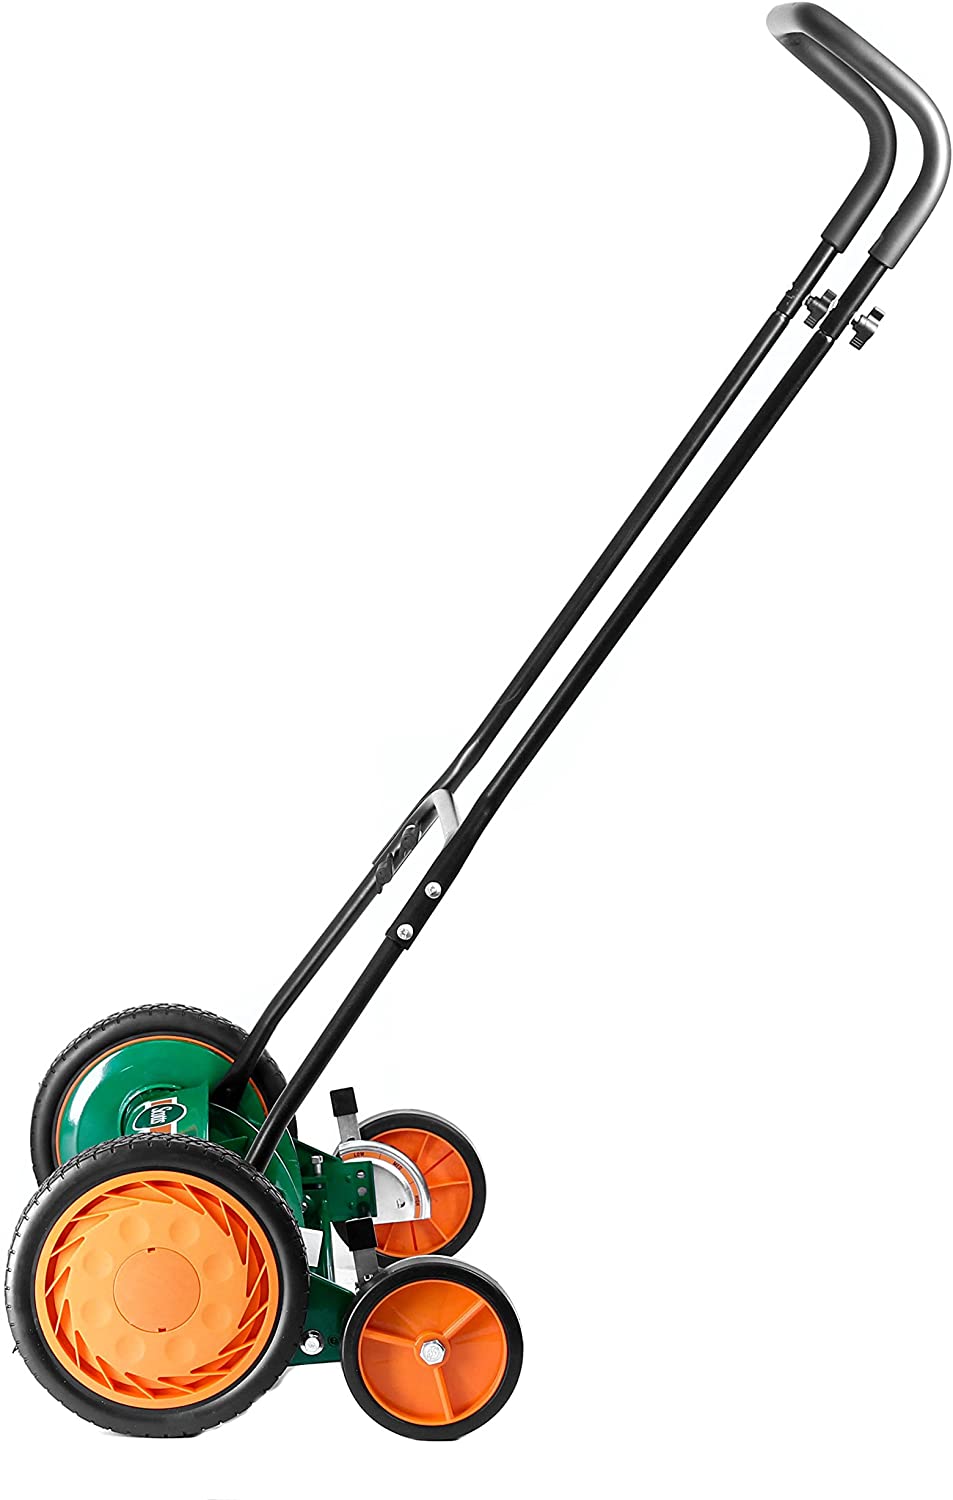 Scotts Outdoor Power Tools 2000-20S 20-Inch 5-Blade Classic Push Reel Lawn Mower - image 2 of 10